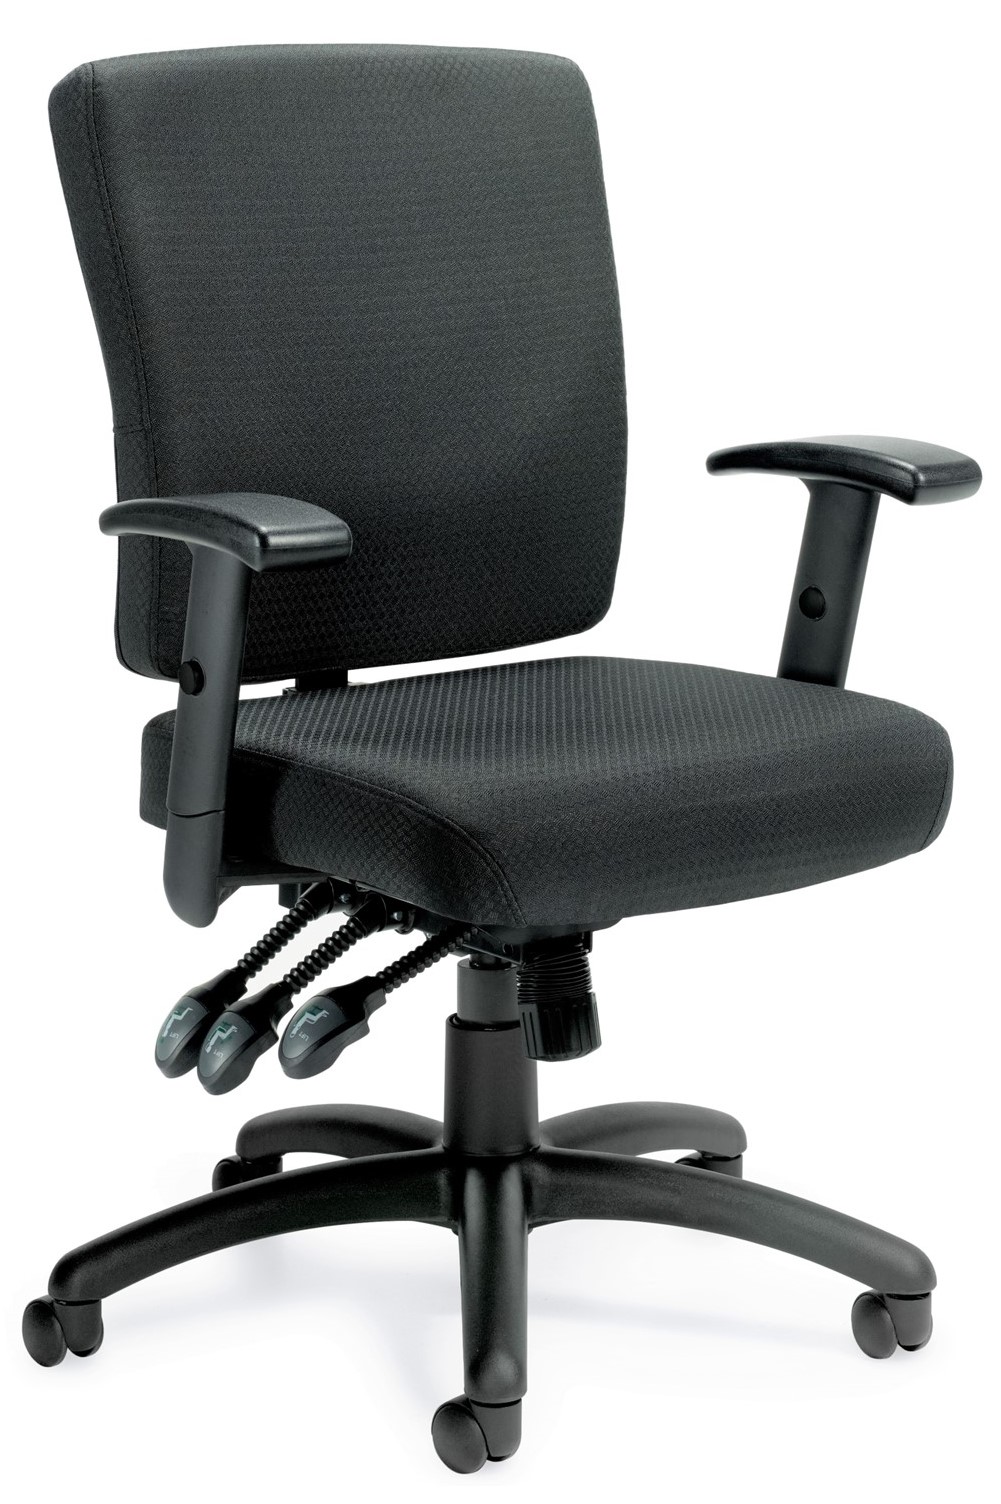 Multi-function medium back task chair with black fabric seat and back, resin 5-star base, and multiple adjustment paddles for seat and back angle adjustments.